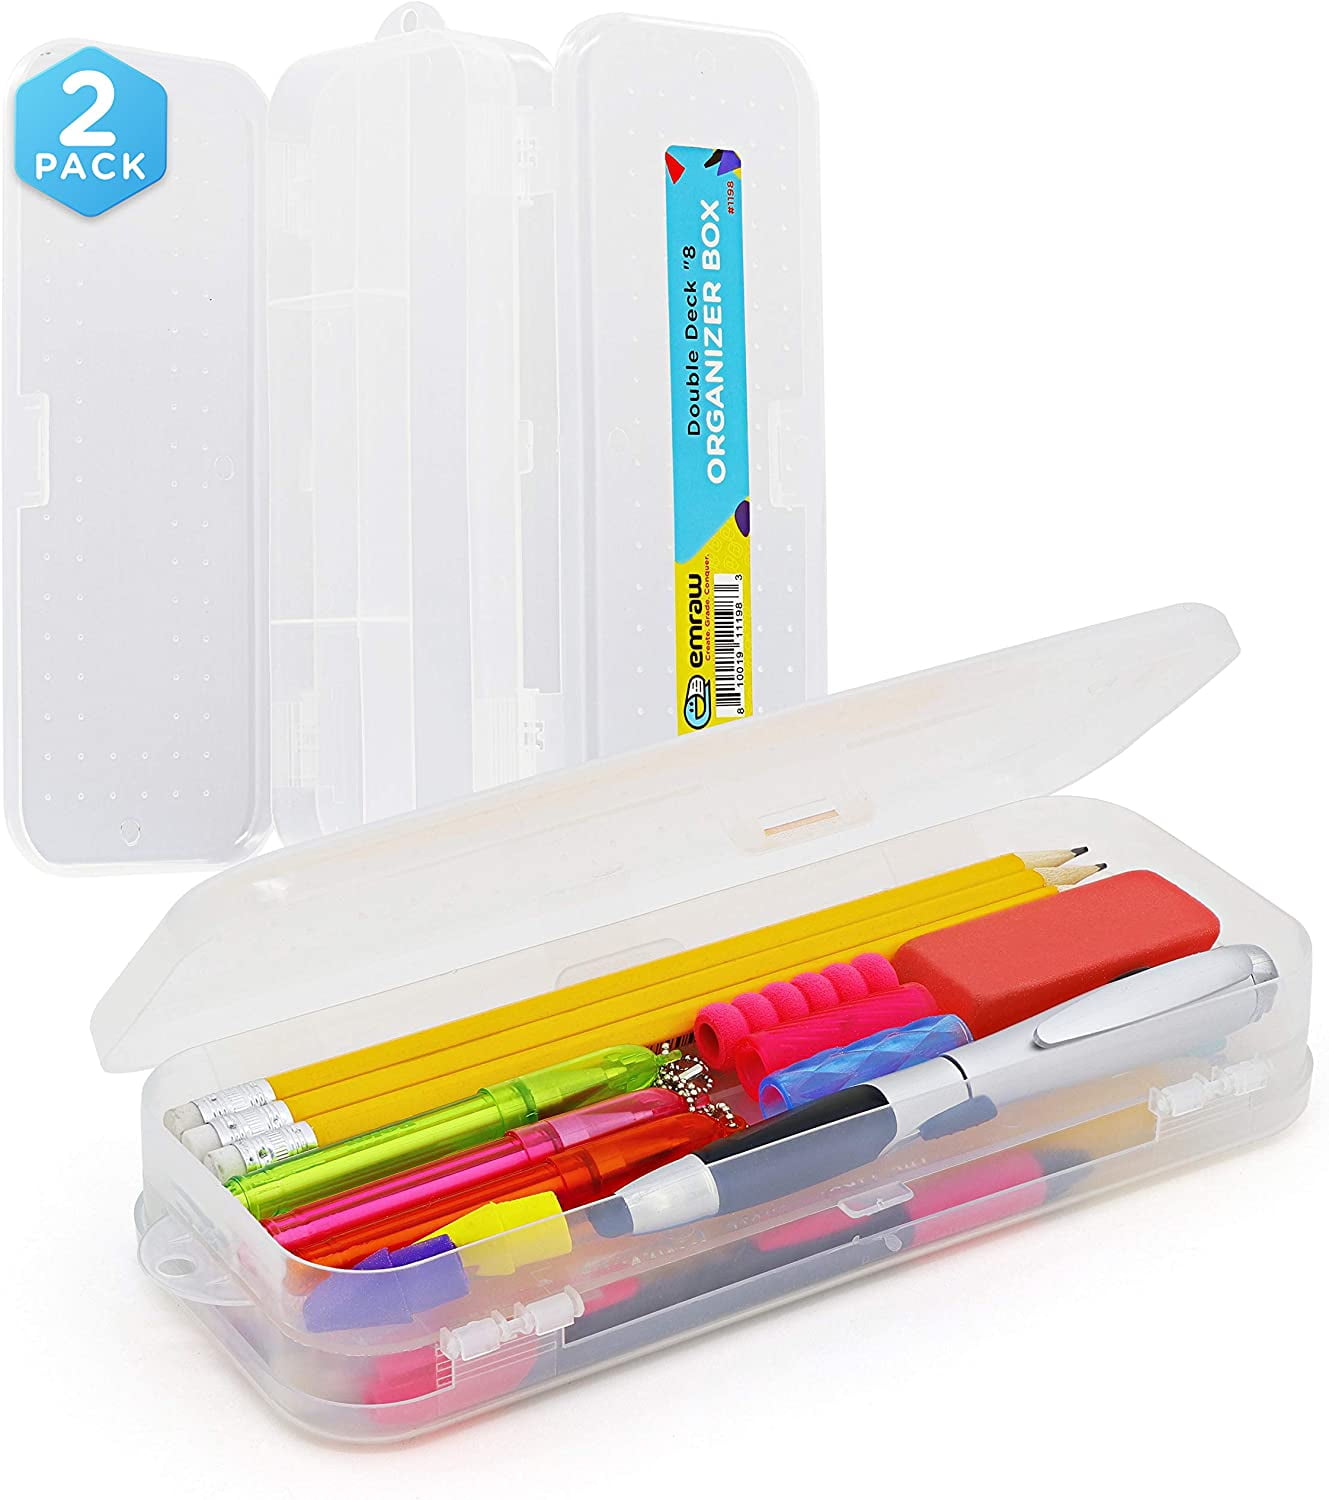 Emraw Multipurpose Utility Box Large Assorted Colors Durable Plastic Polypropylene Pencil Box with Lid Snap Closure Translucent View Storage Box for Pencils and Pens Pack of 2 